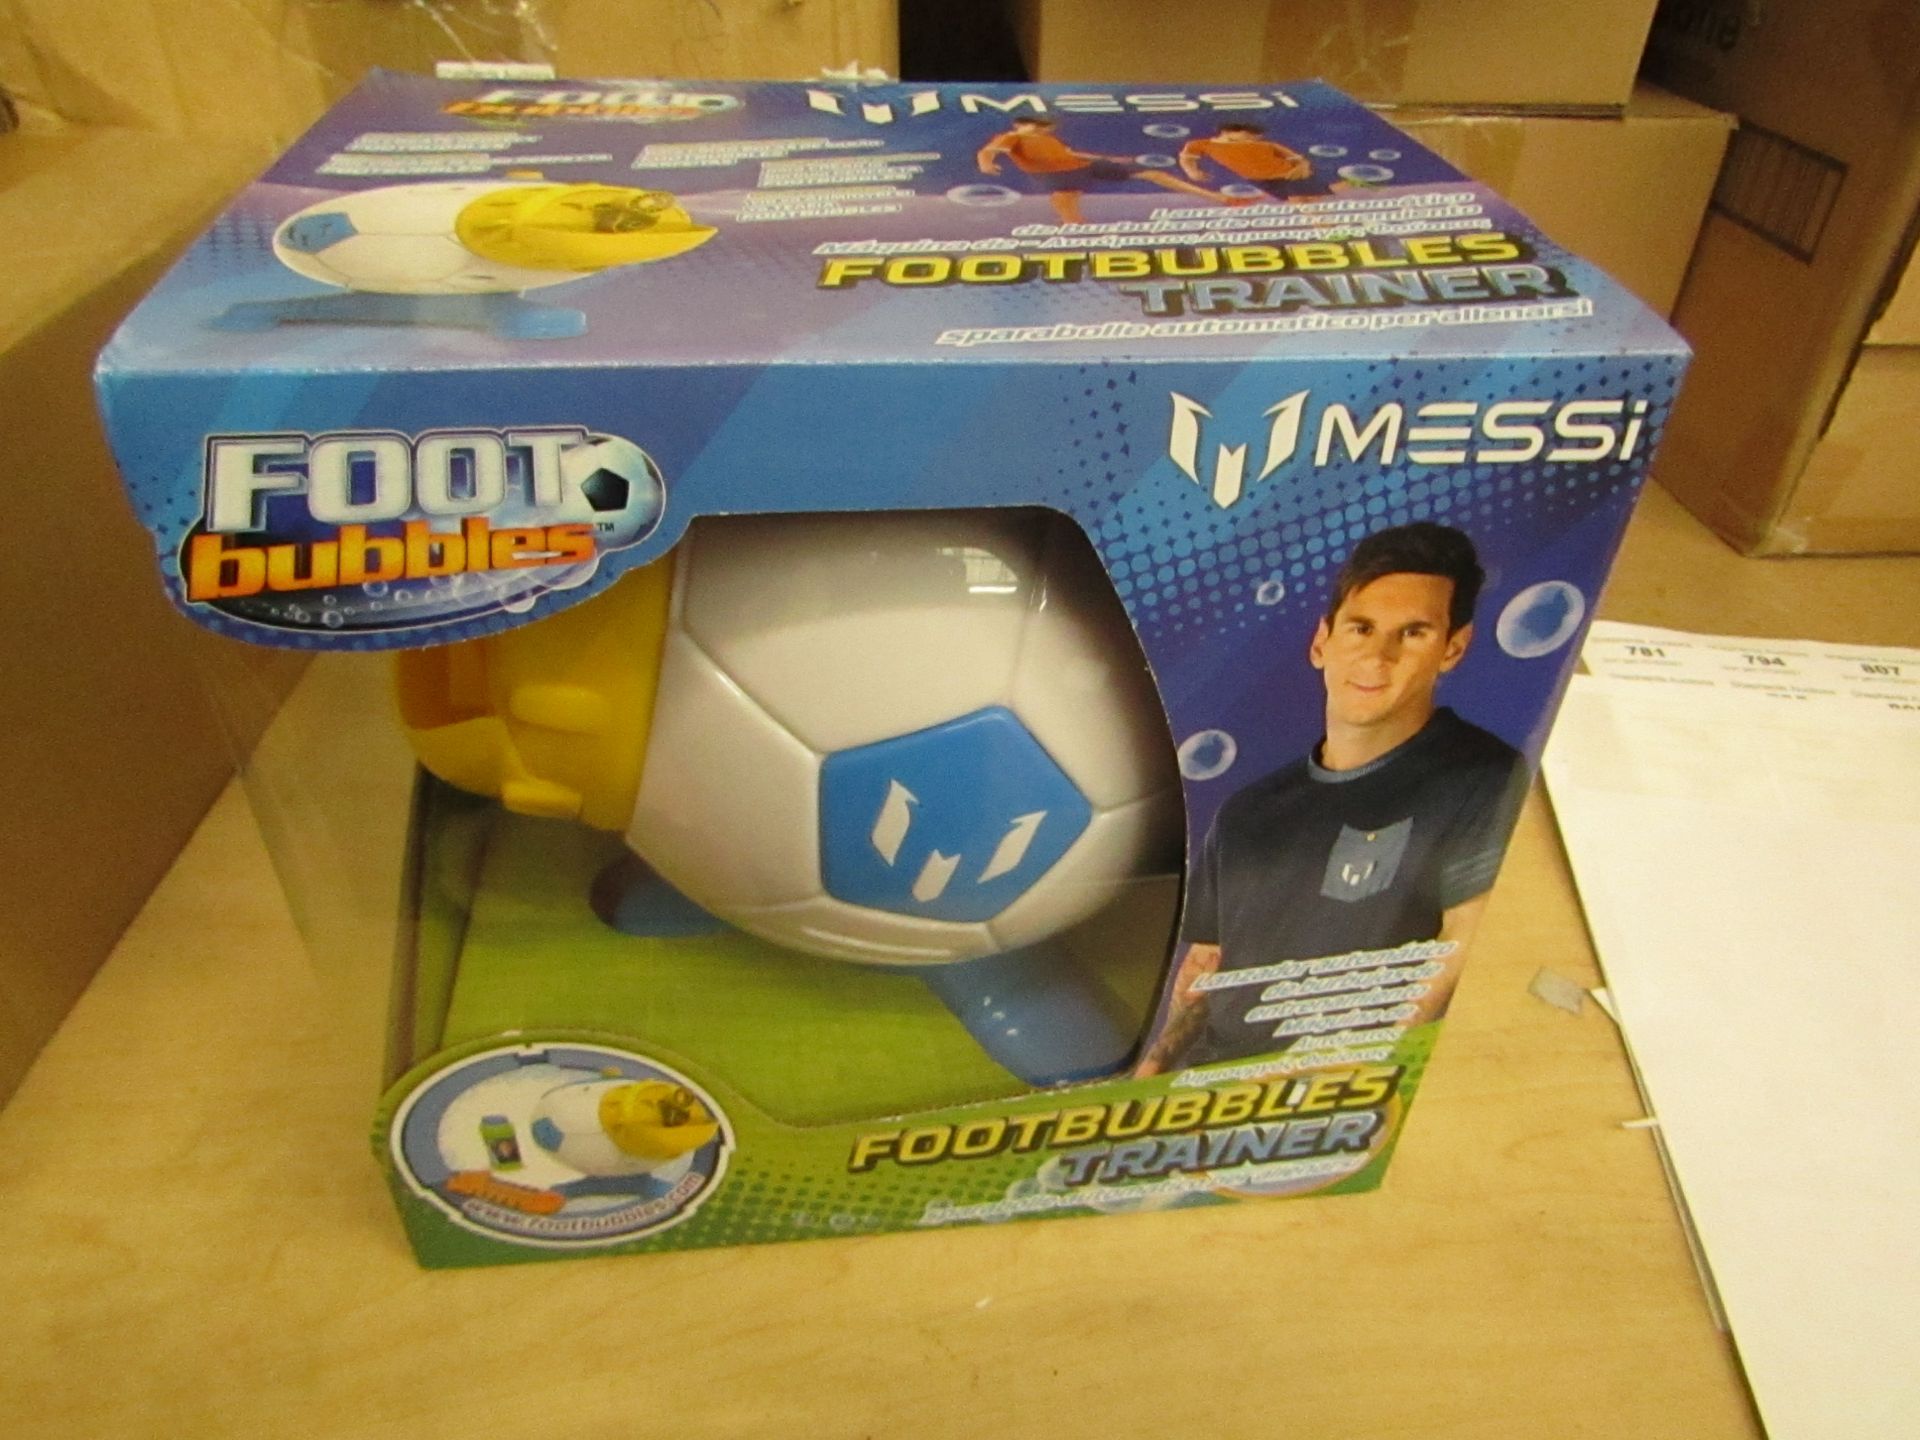 2x Messi Footbubbles Trainers - New & Packaged.